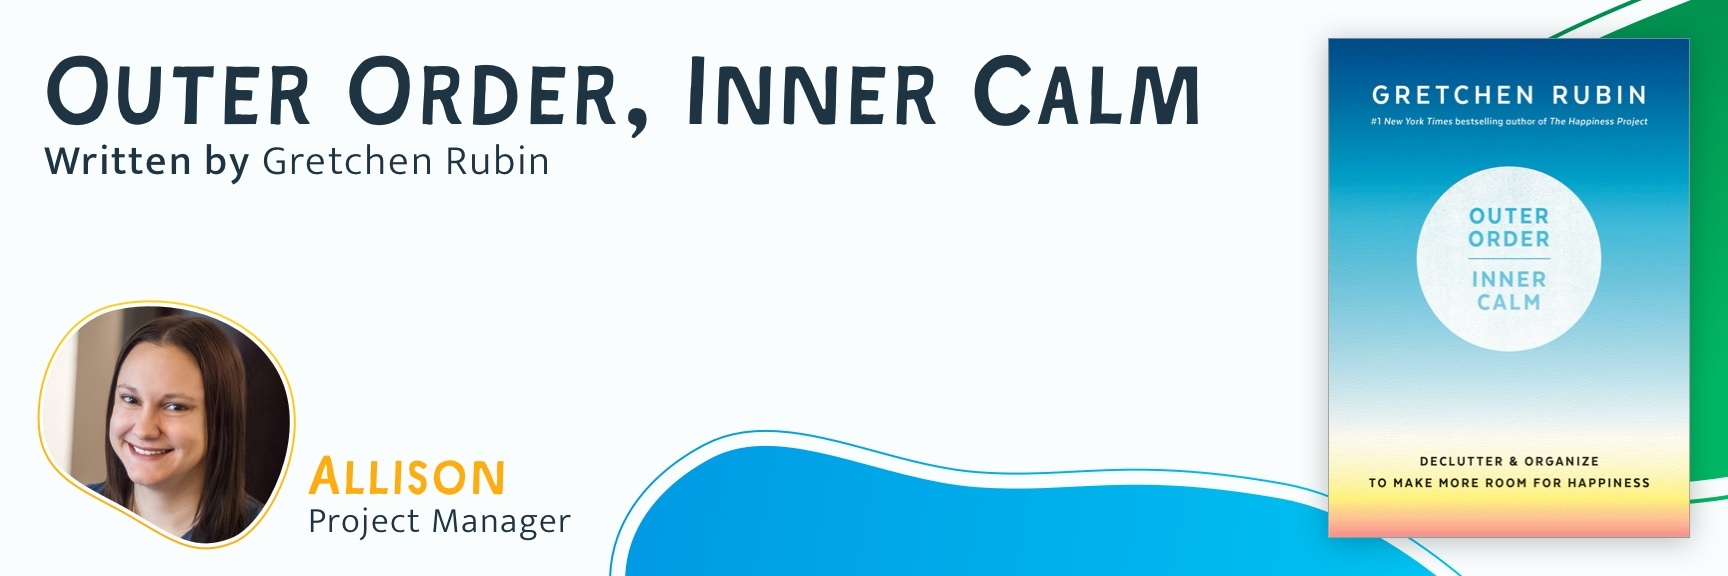 Outer Order, Inner Calm - Read by Allison